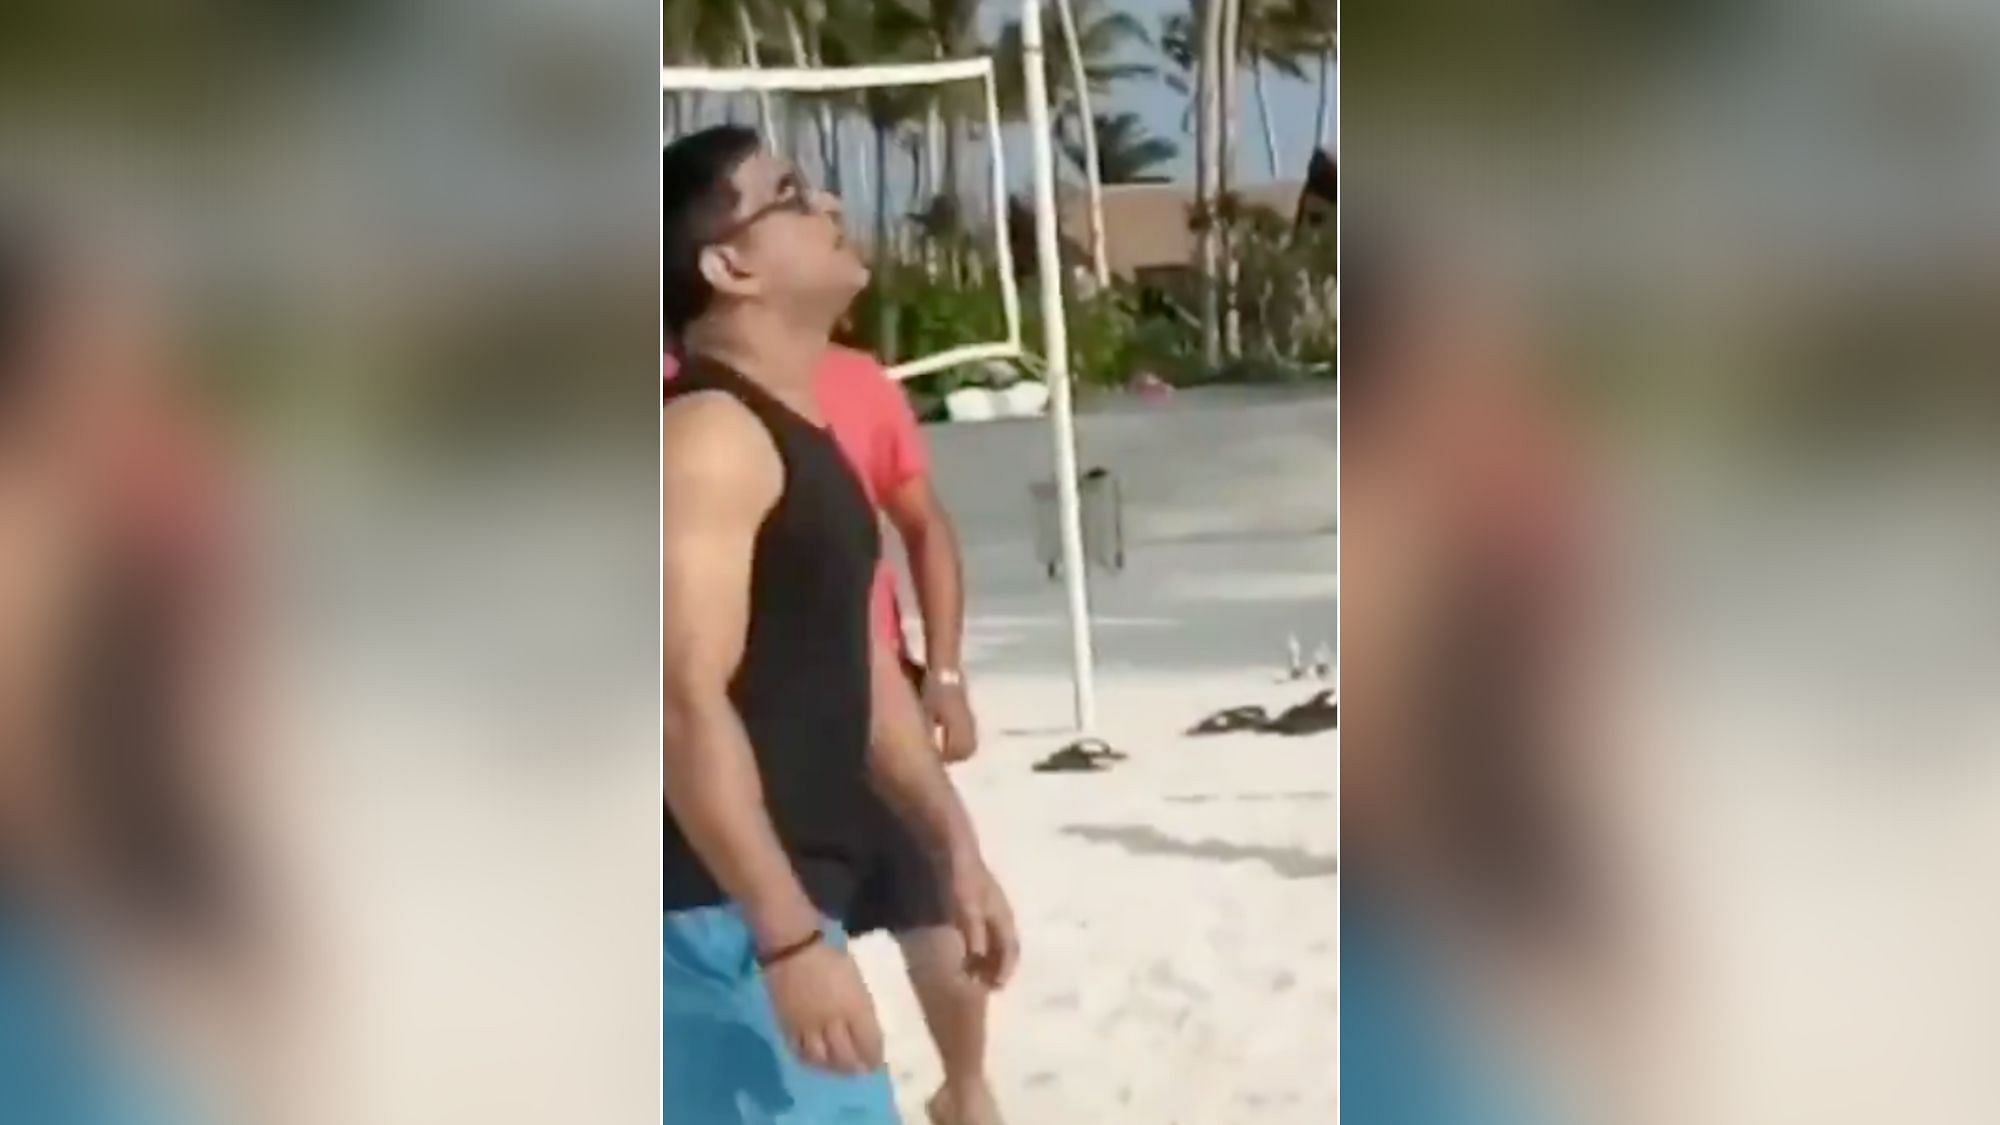 Mahendra Singh Dhoni was spotted playing playing volleyball with his group of friends in the Maldives as Team India get ready to take on New Zealand in the ODI series after sweeping the T20I series 5-0.